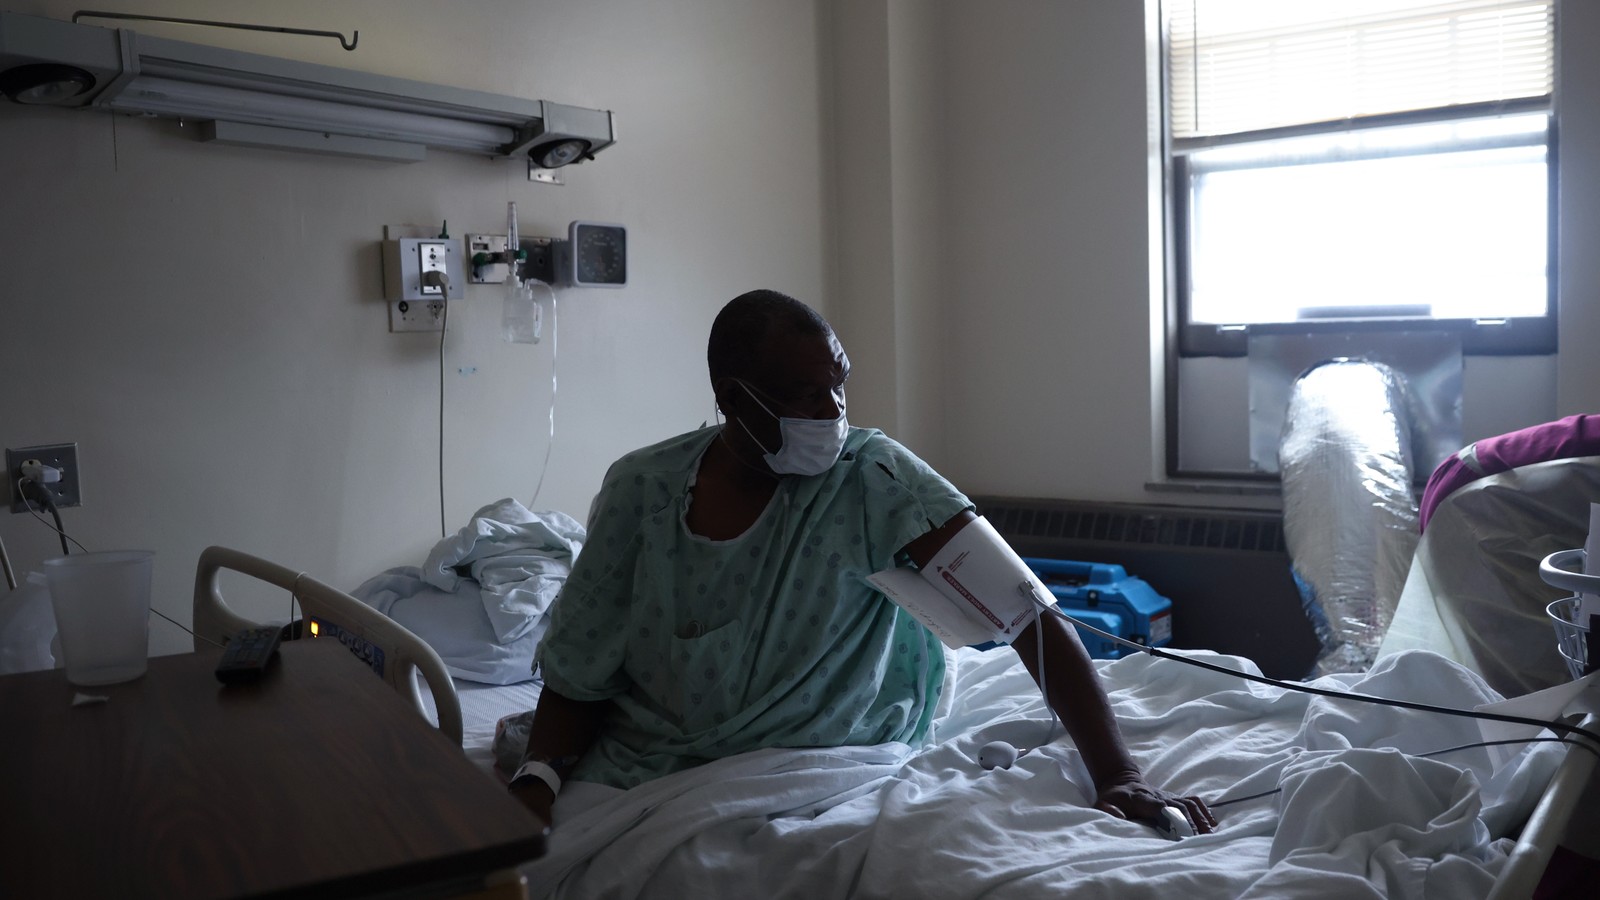 Thinking 'beyond the hospital' for Black men recovering from